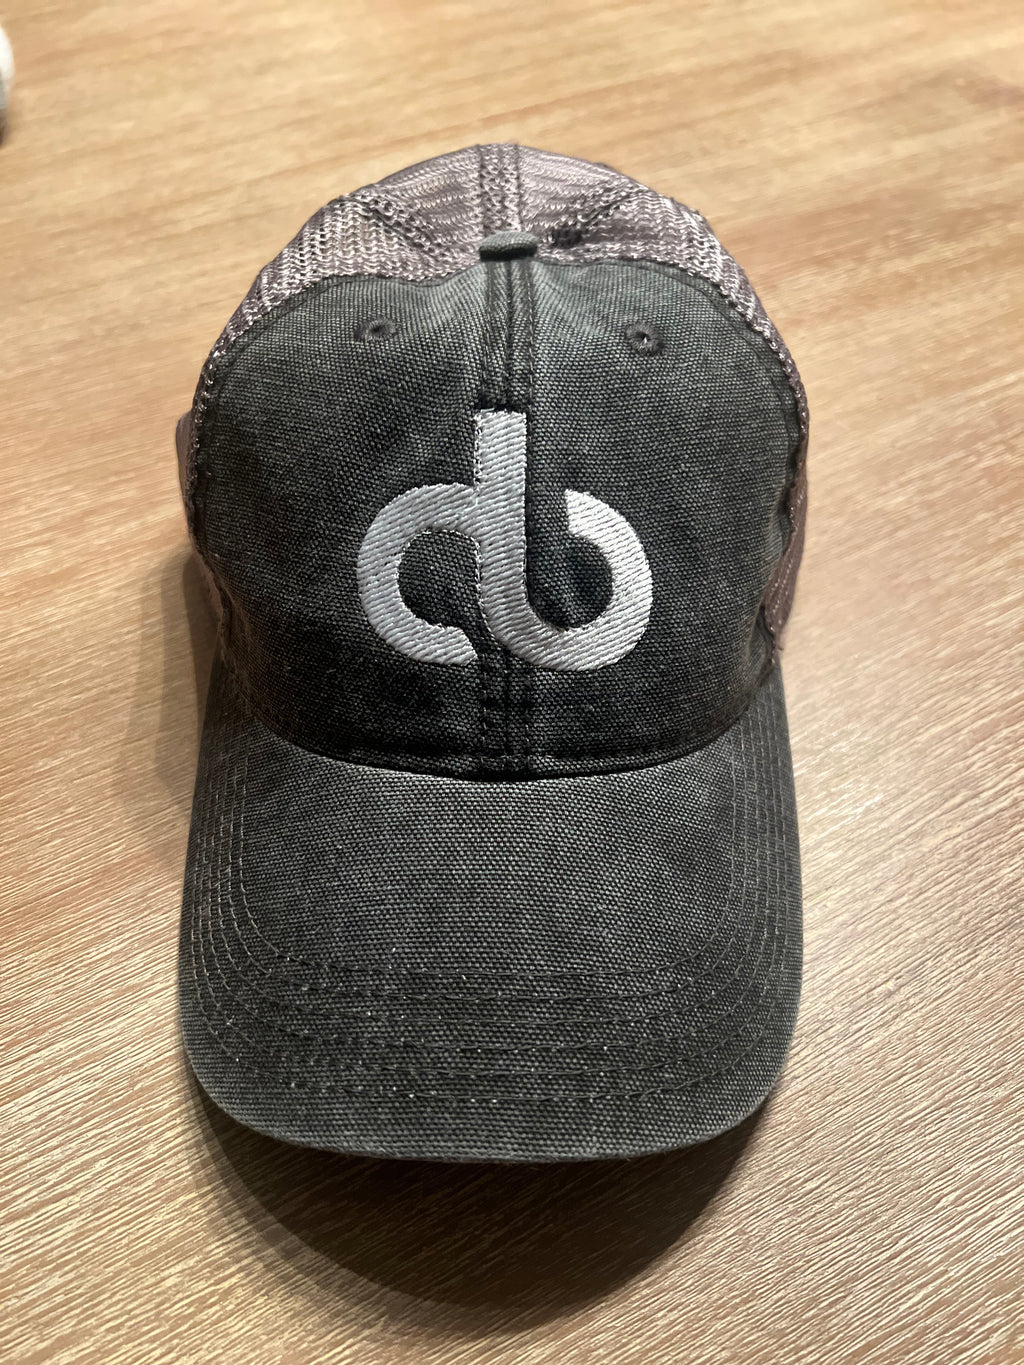 Custom Embroidered Legacy Hat